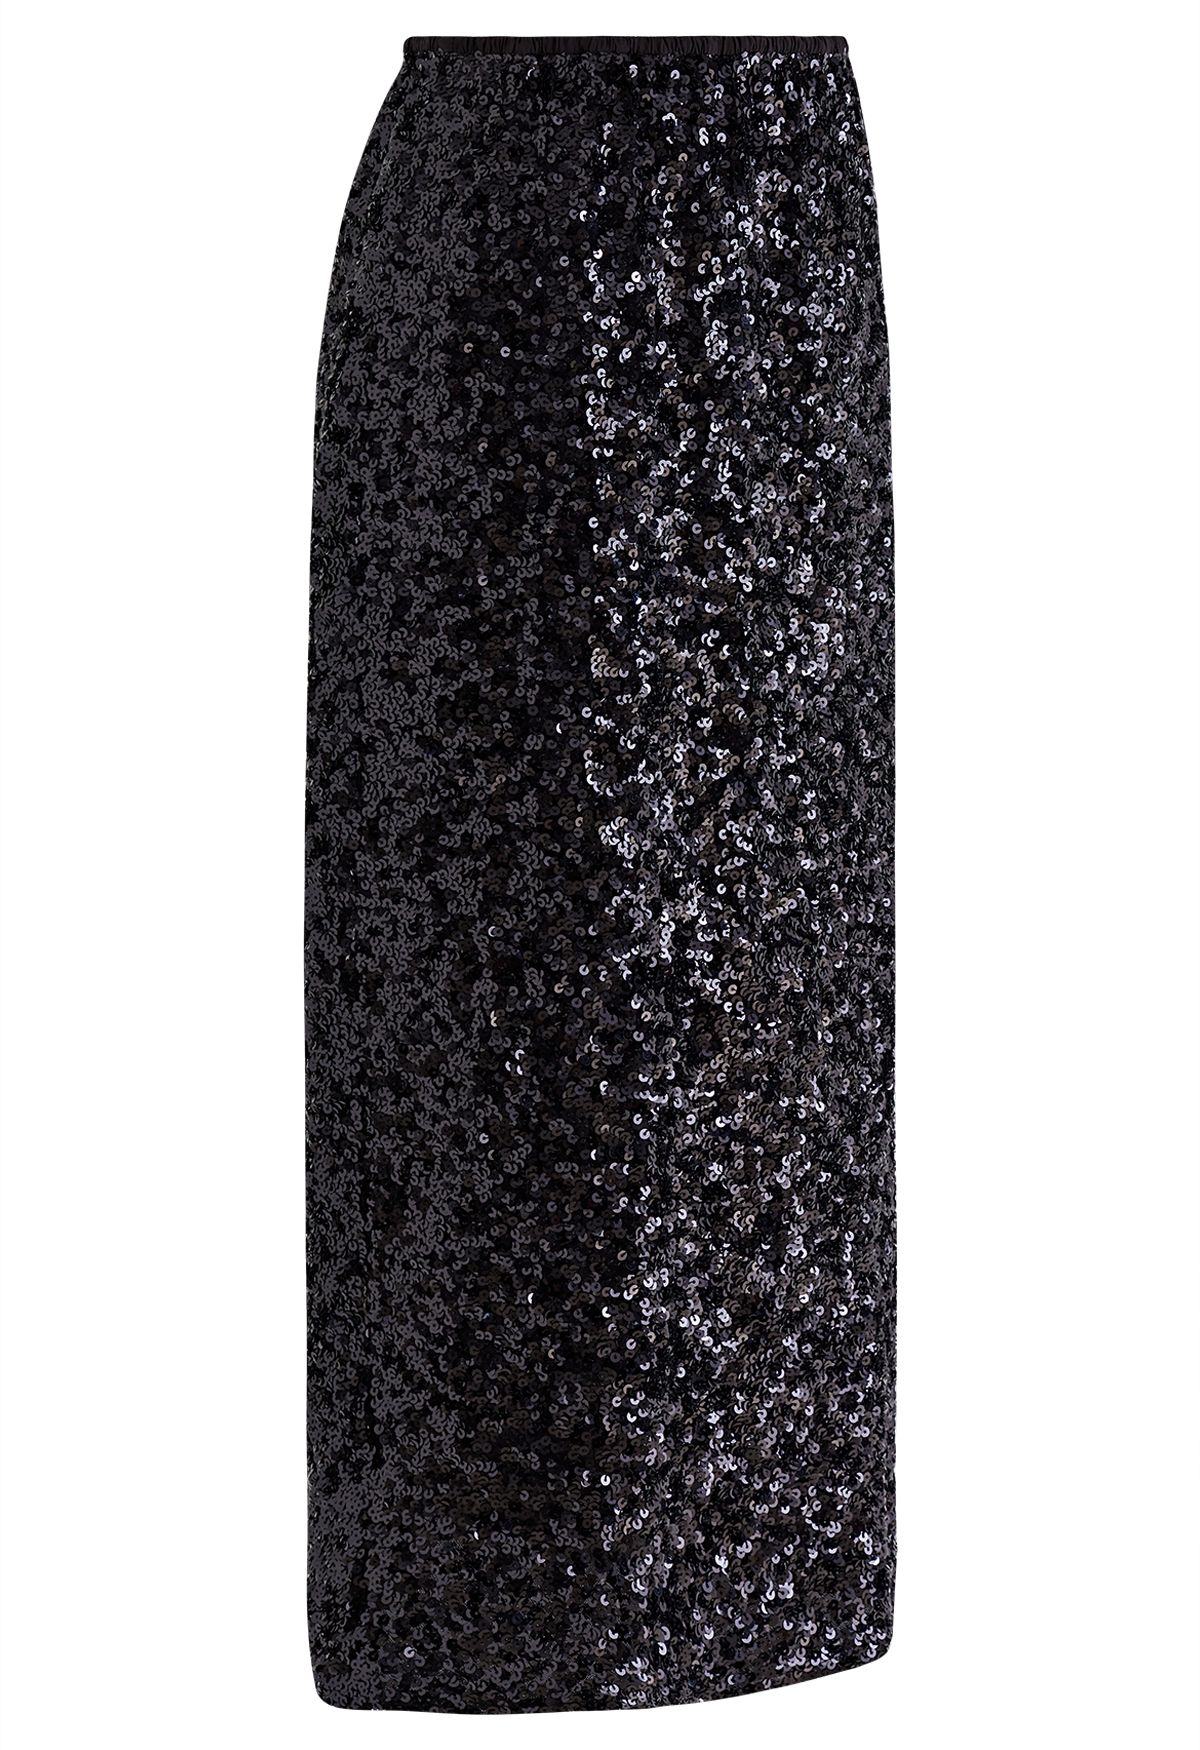 Iridescent Sequin Embellished Pencil Skirt in Black - Retro, Indie and ...